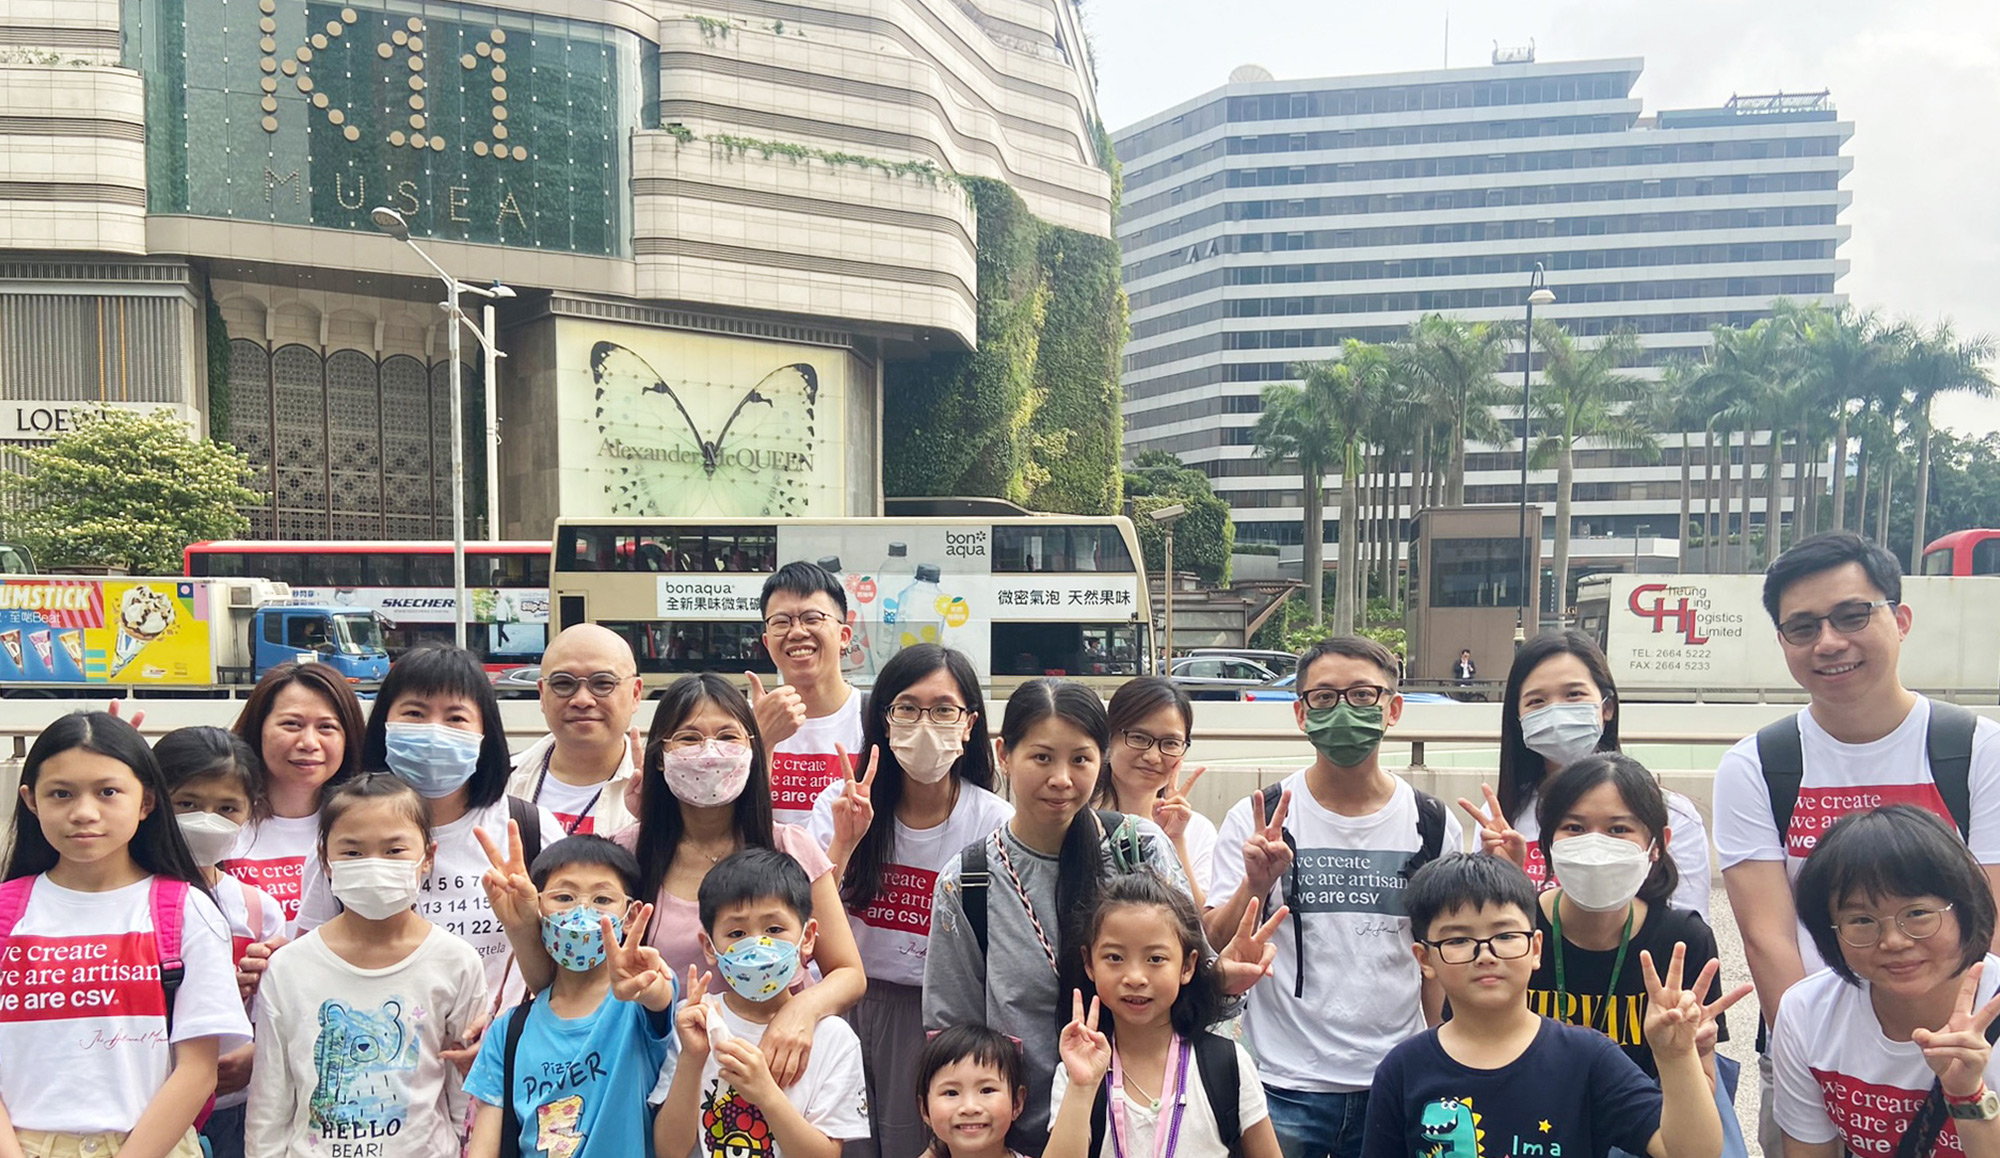 Cover Image - The New World Group Volunteer Team led grassroots families on a journey to explore and learn about Tsim Sha Tsui